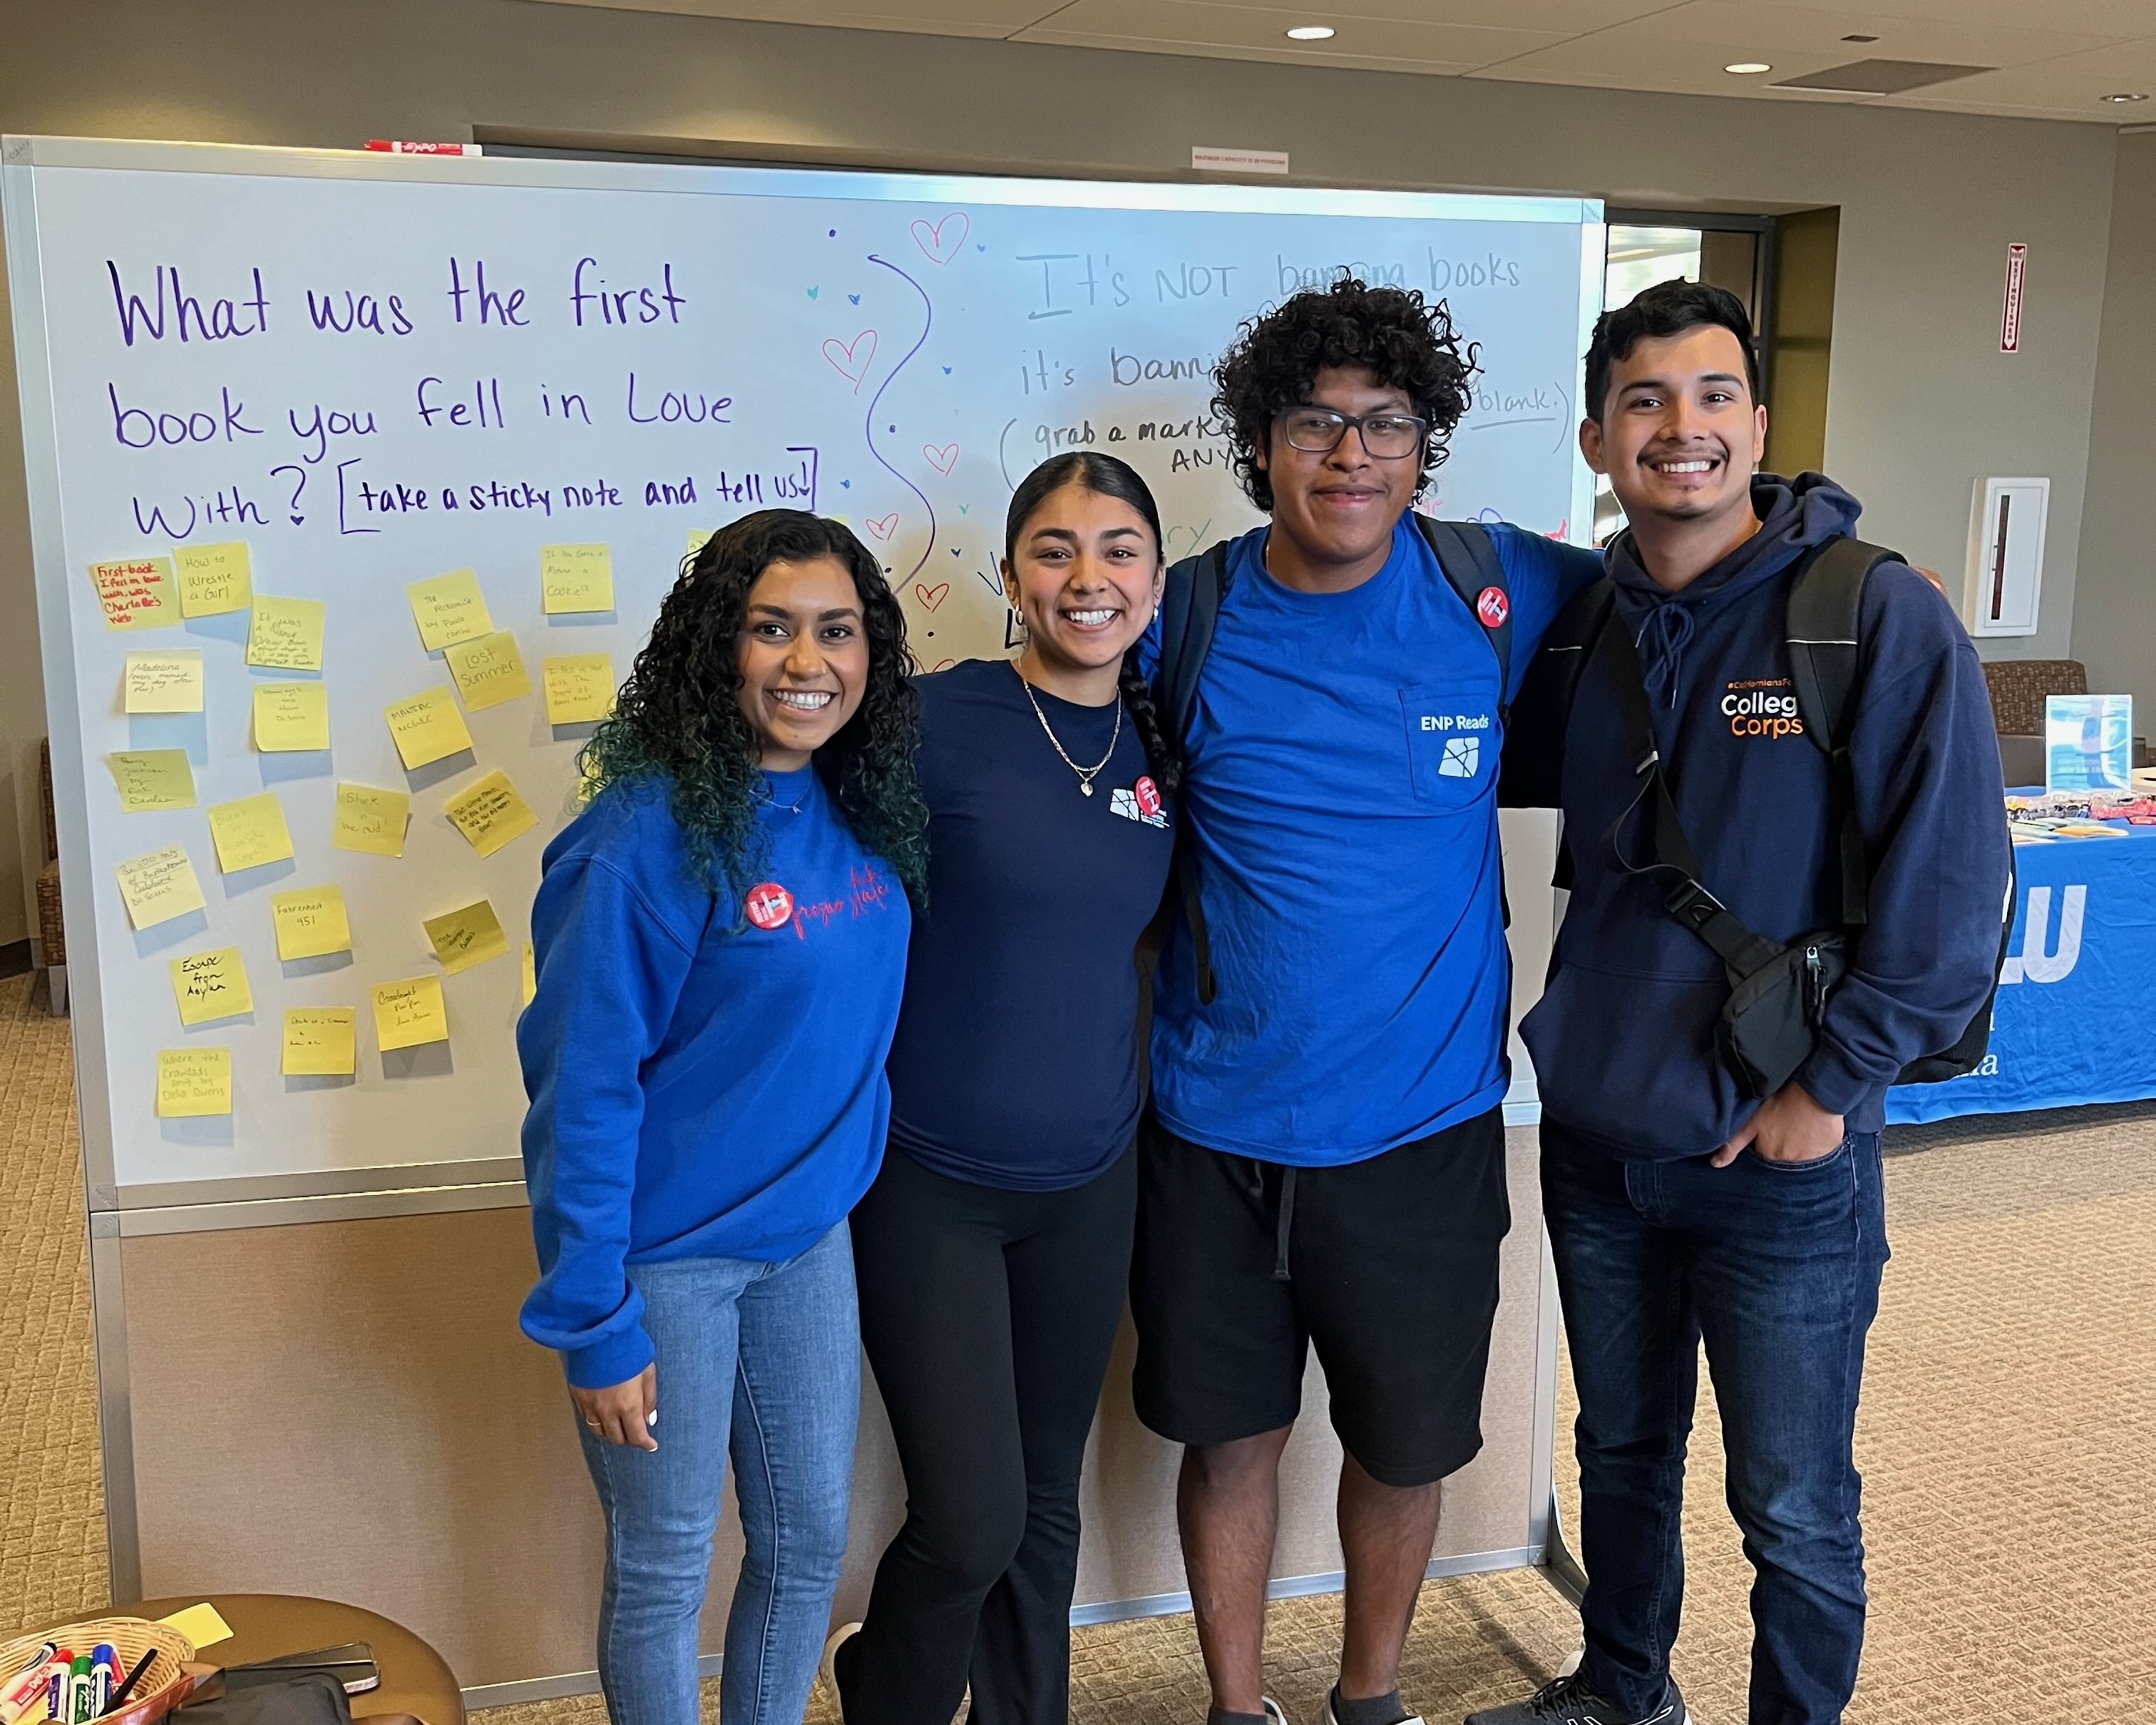 Four students standing together in front of a whiteboard with post-it notes on it. The whiteboard has the question written on it: "What was the first book you fell in love with?"